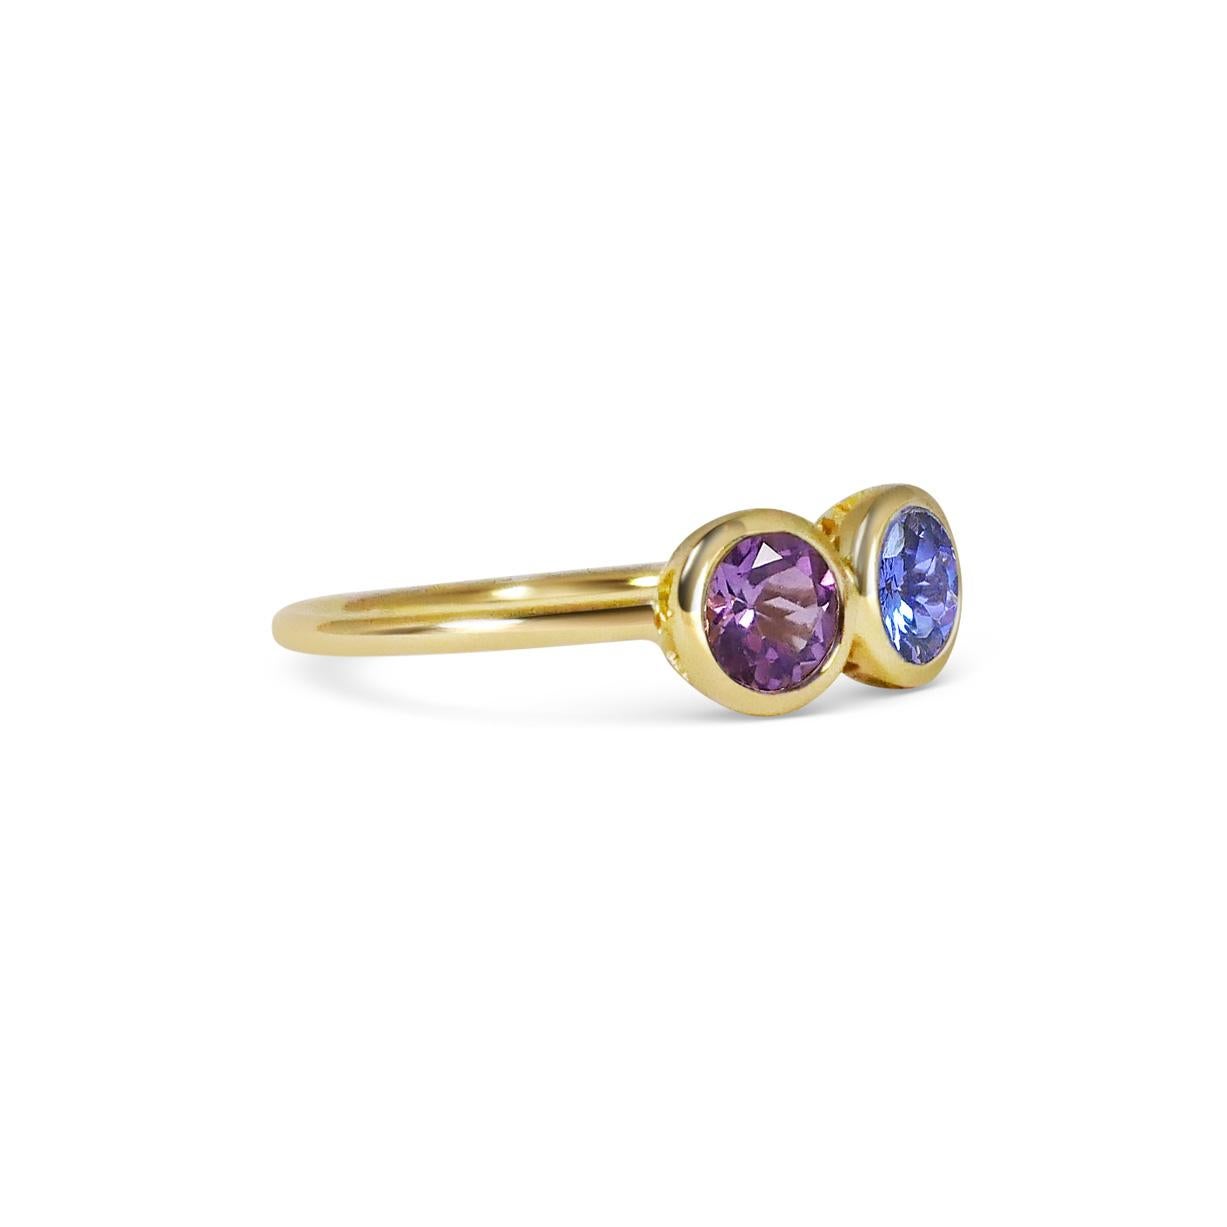 Matching stones together is one of Anna's favorite part of the design process. Here she has carefully matched a beautiful ink blue Tanzanite next to a deep purple Amethyst for their strong and vibrant hues. Set in 18k yellow gold to compliment and